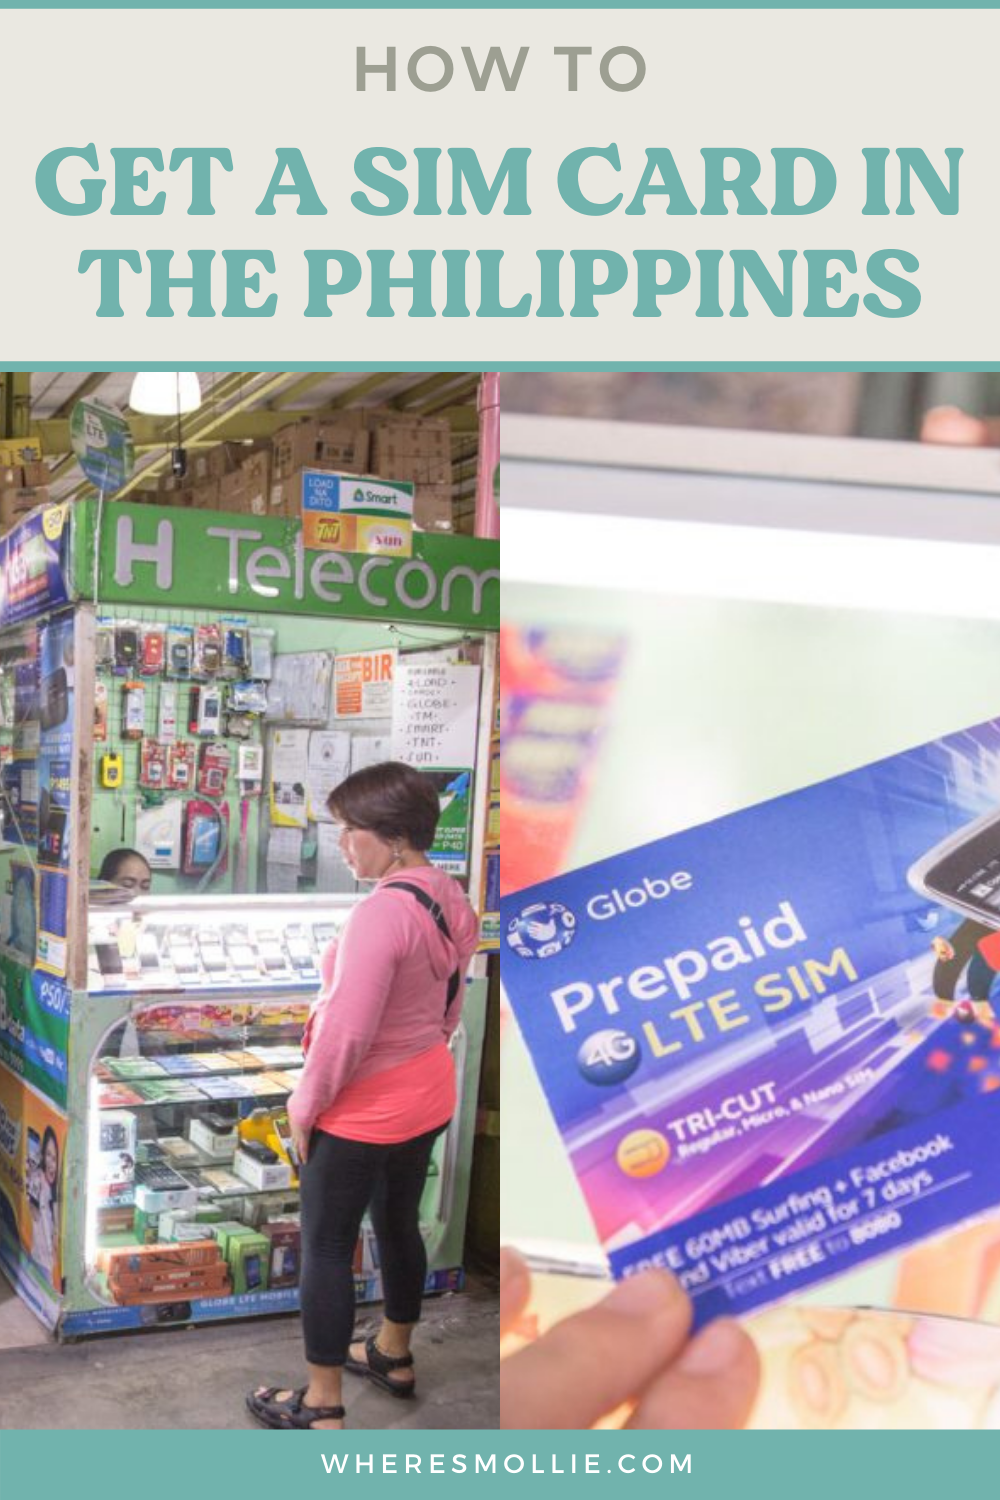 Getting a SIM card in the Philippines